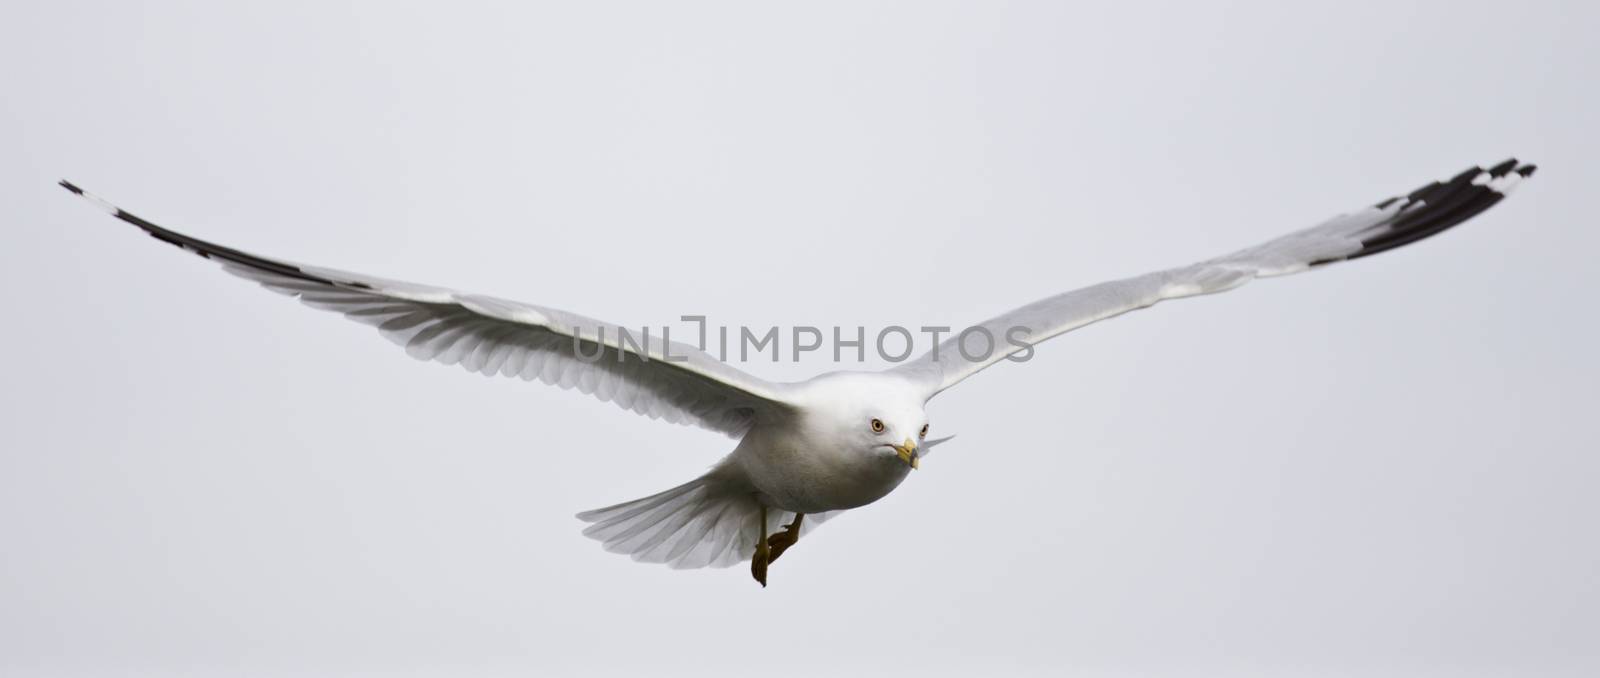 Beautiful isolated photo of a calm flight of a gull by teo